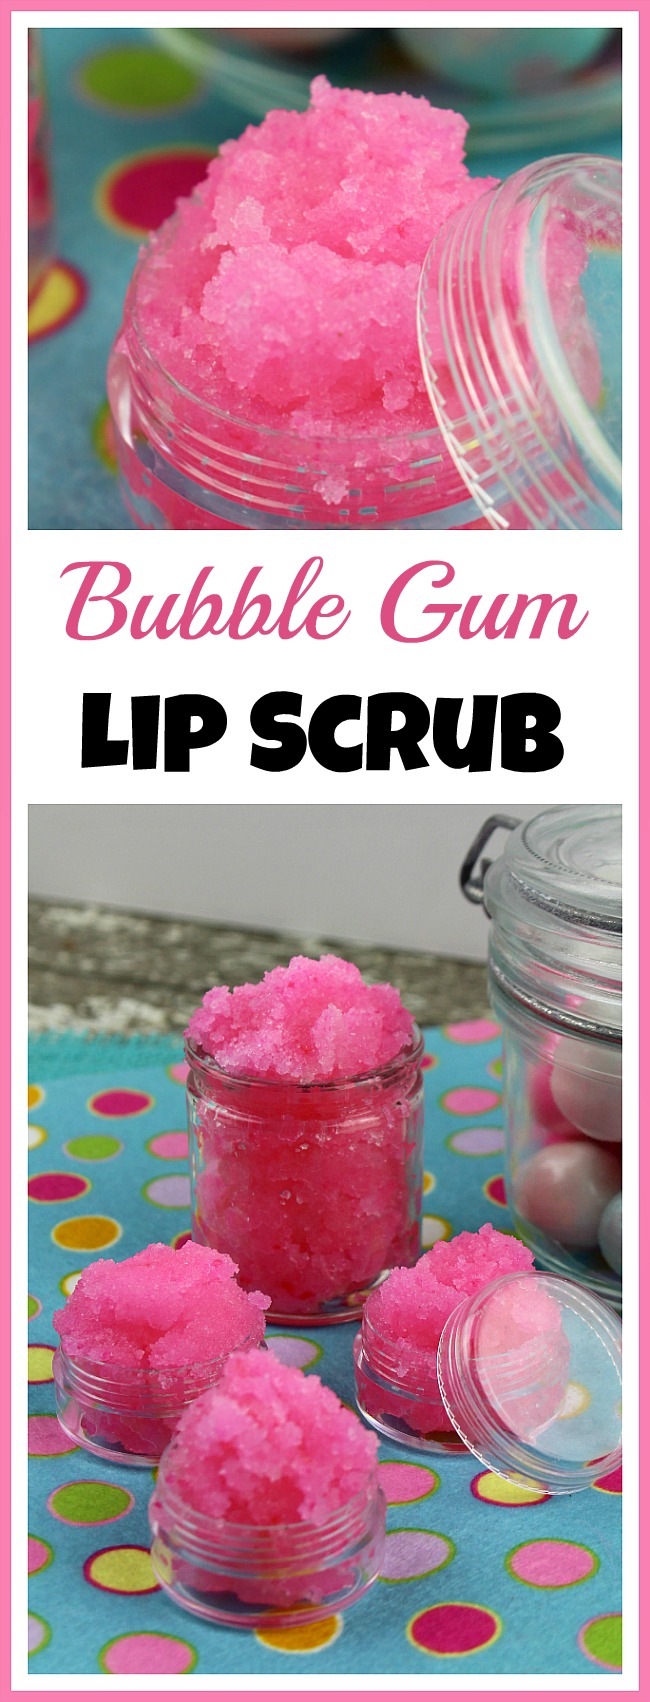 If you want lips that look and feel great, you should use a lip scrub! This luxurious DIY bubble gum lip scrub is easy and inexpensive to make!